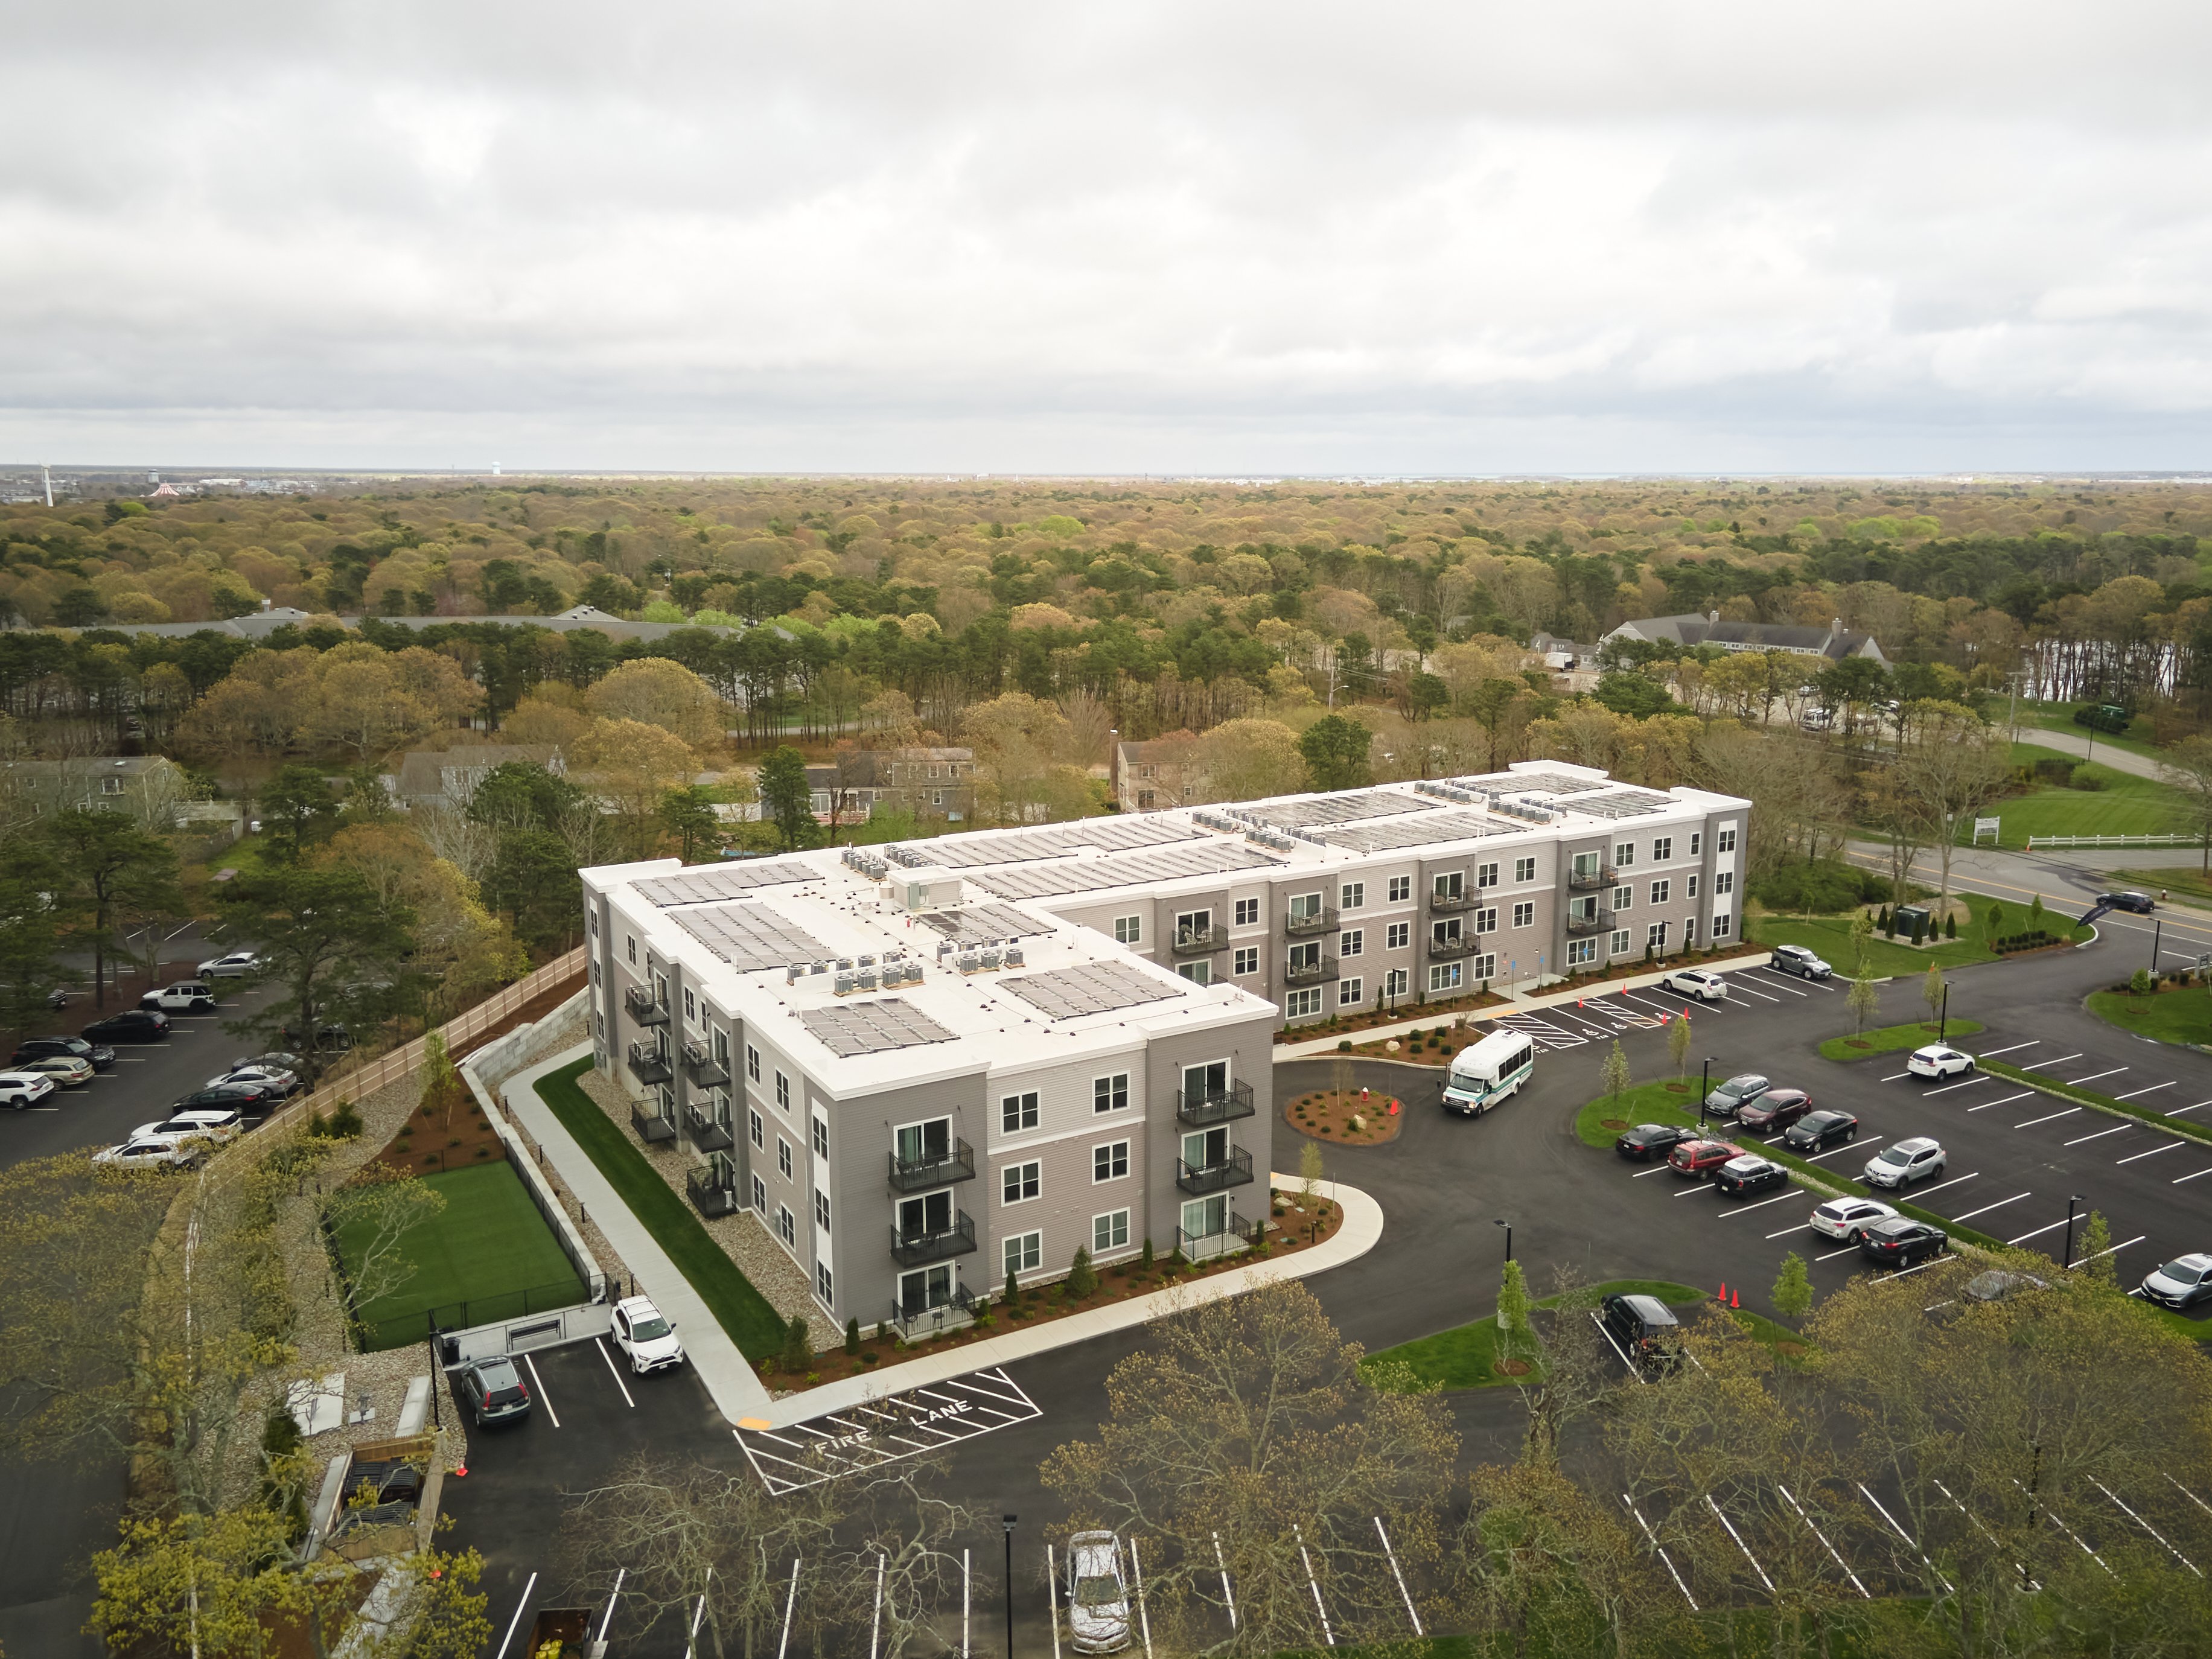 Residence at 850 apartments in Hyannis